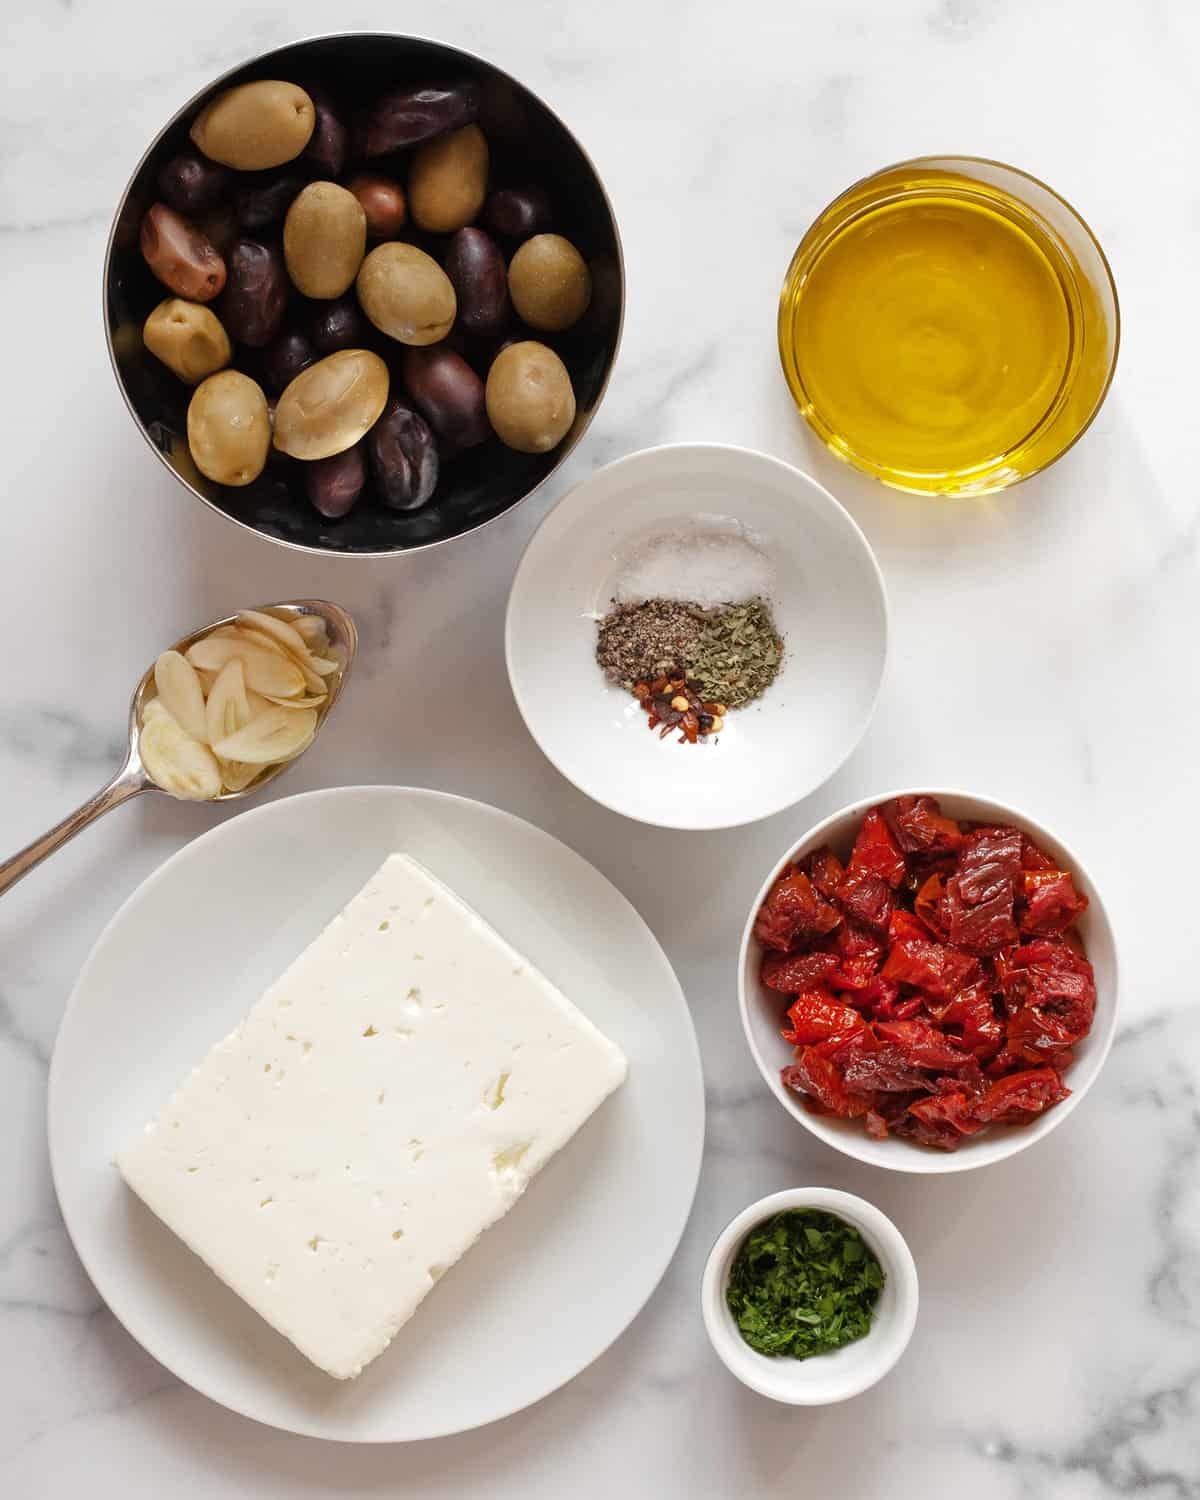 Ingredients including feta, tomatoes, olives, olive oil, garlic and spices.